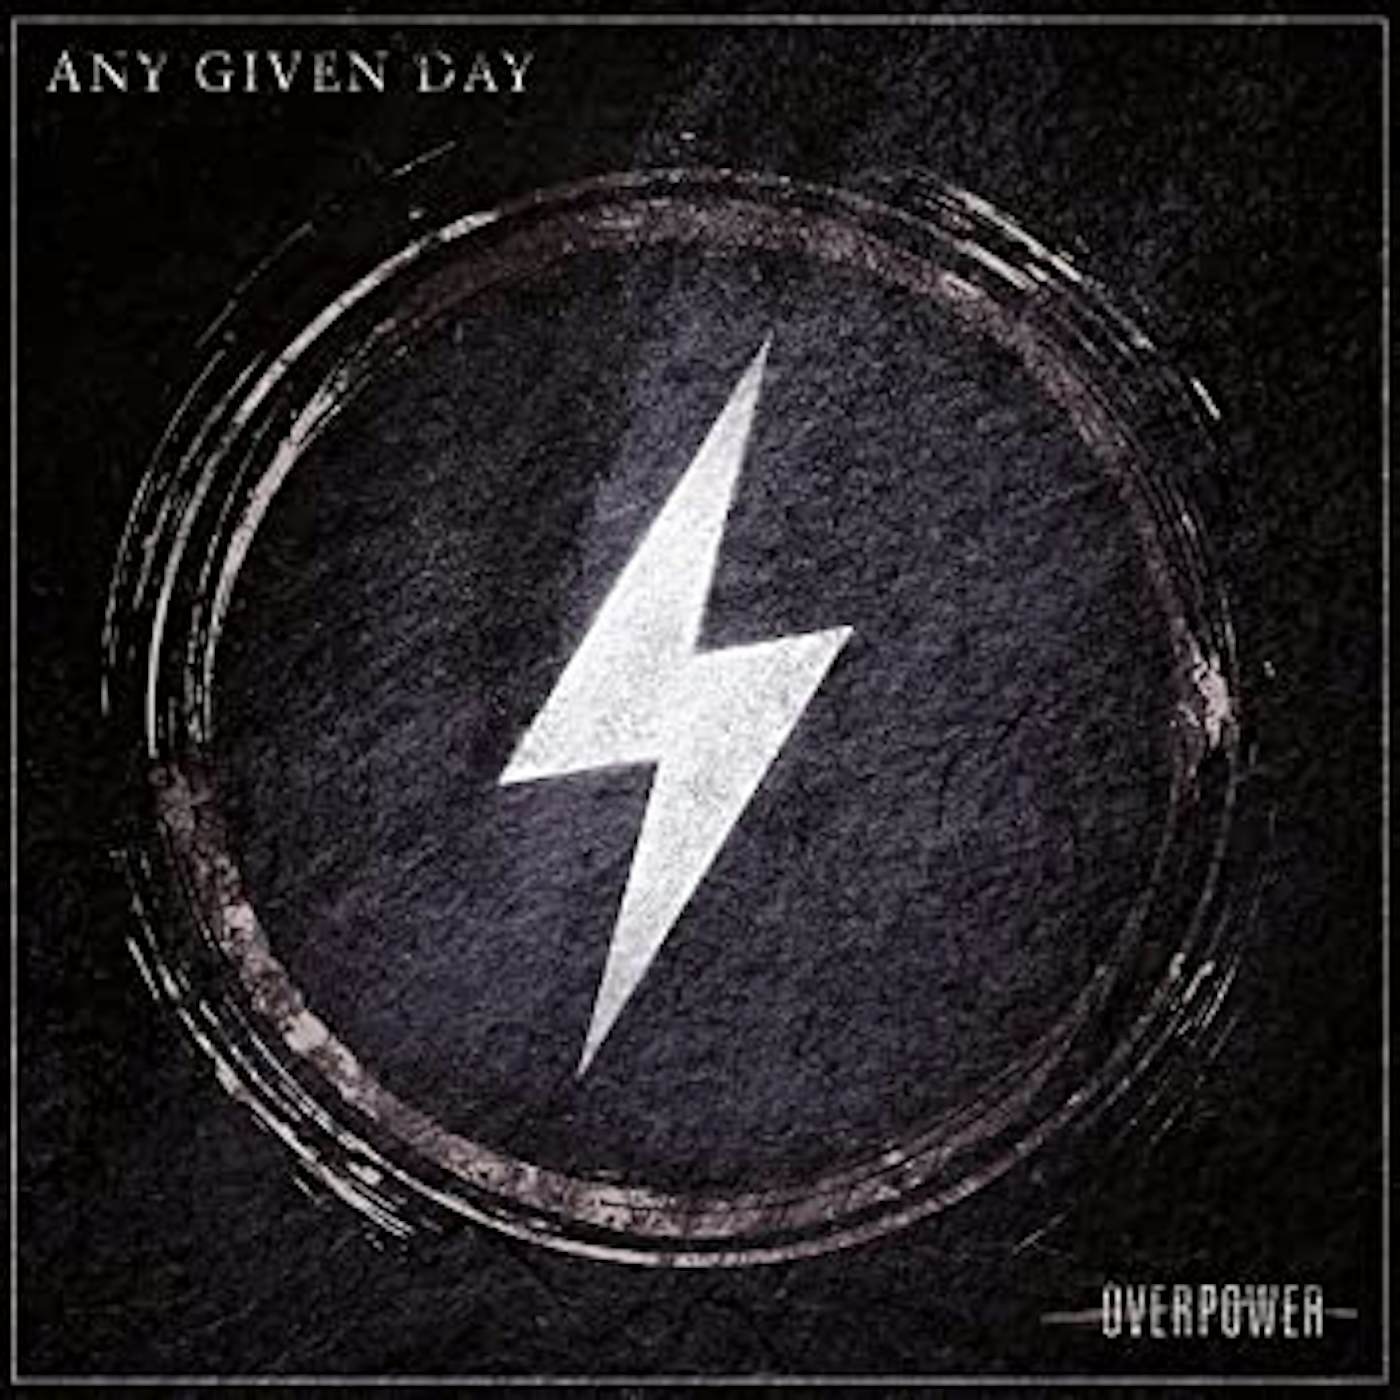 Any Given Day Overpower Vinyl Record